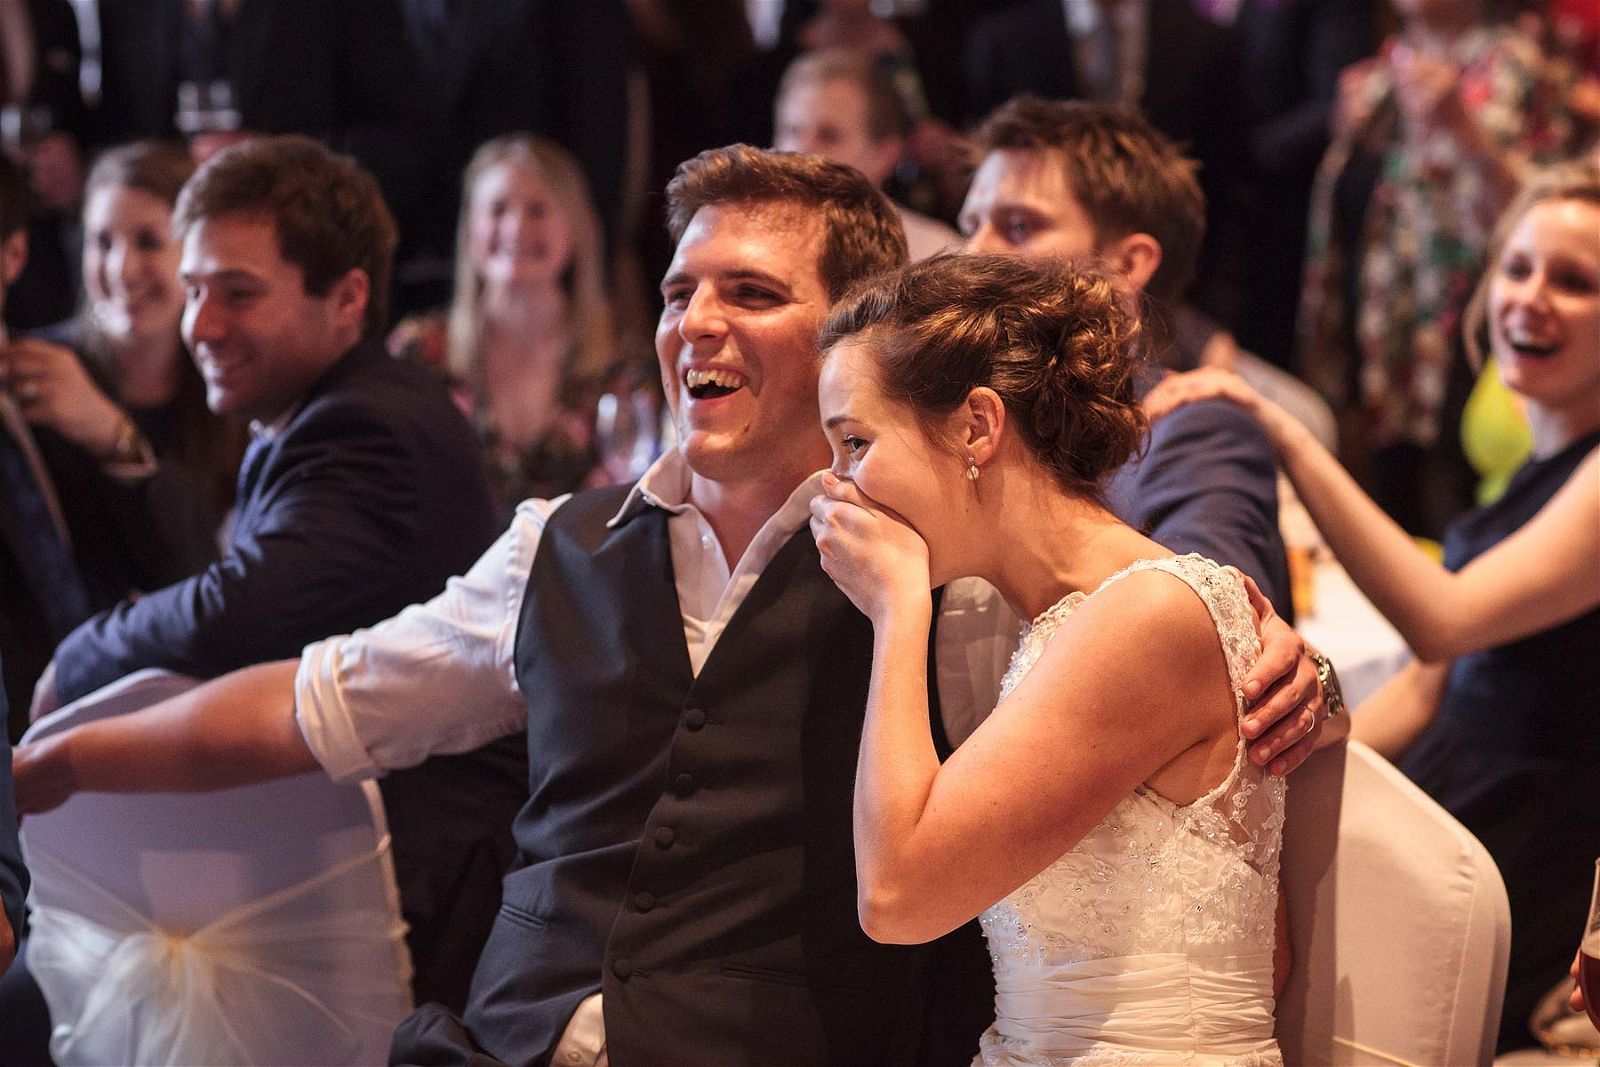 Candid photographs that show the fun of the evening reception in the Tithe Barn at Hundred House Hotel in Norton by Shropshire Documentary Wedding Photographer Stuart James